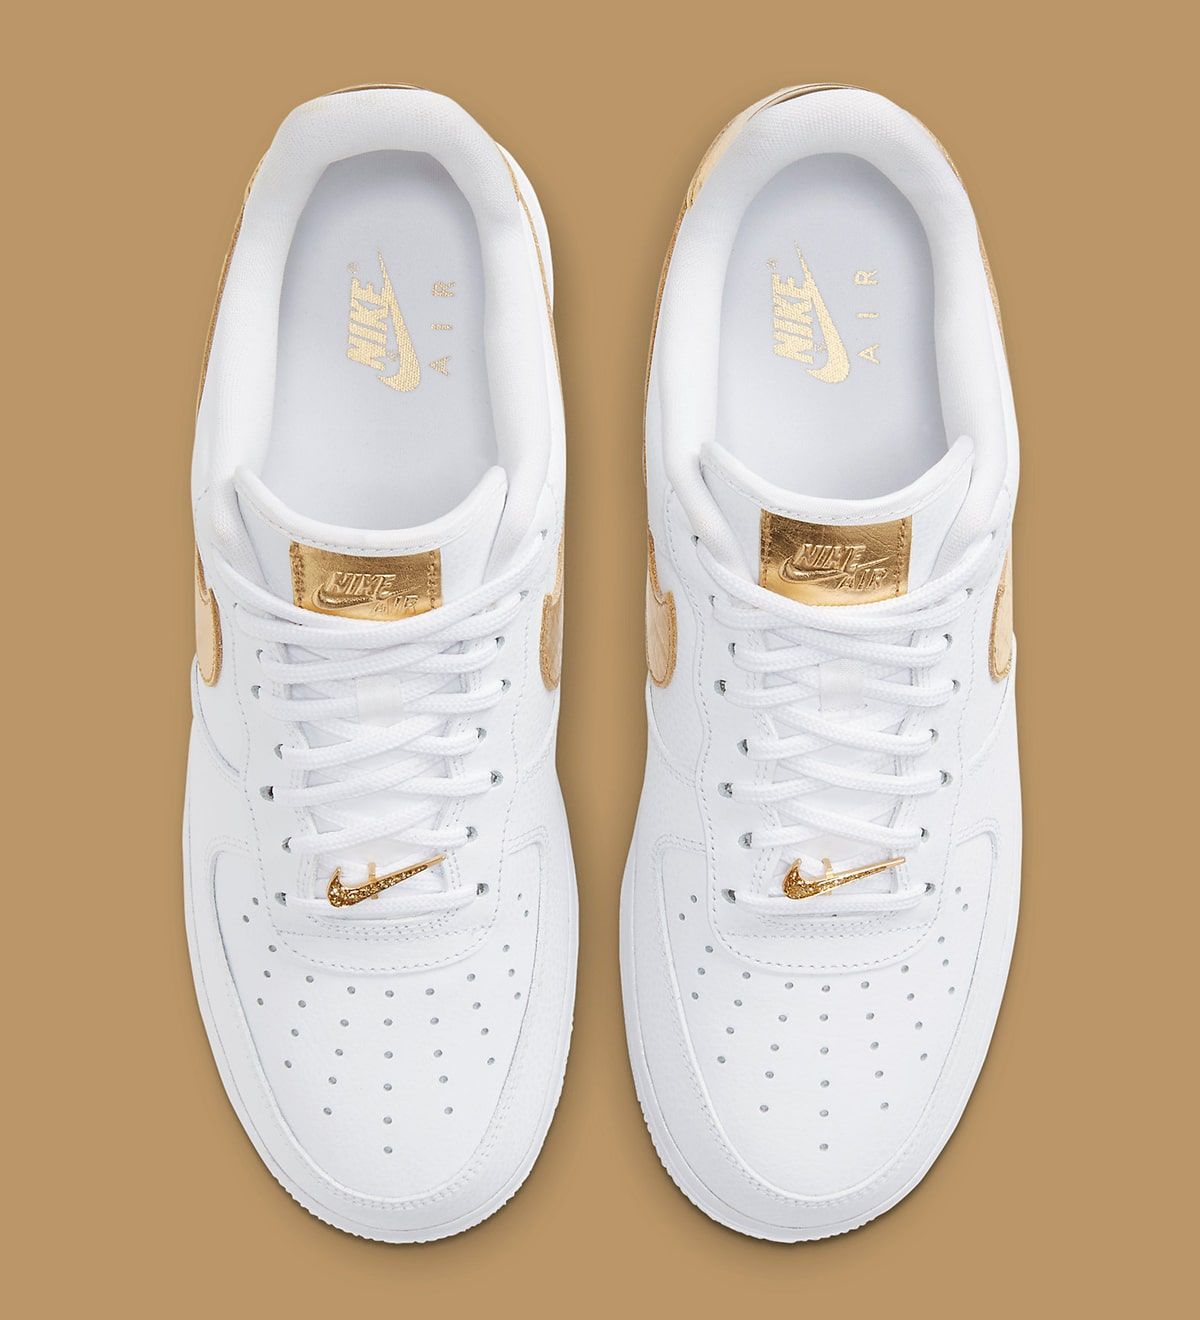 Rose Gold Air Force 1 Discount Supplier, Save 55% | jlcatj.gob.mx